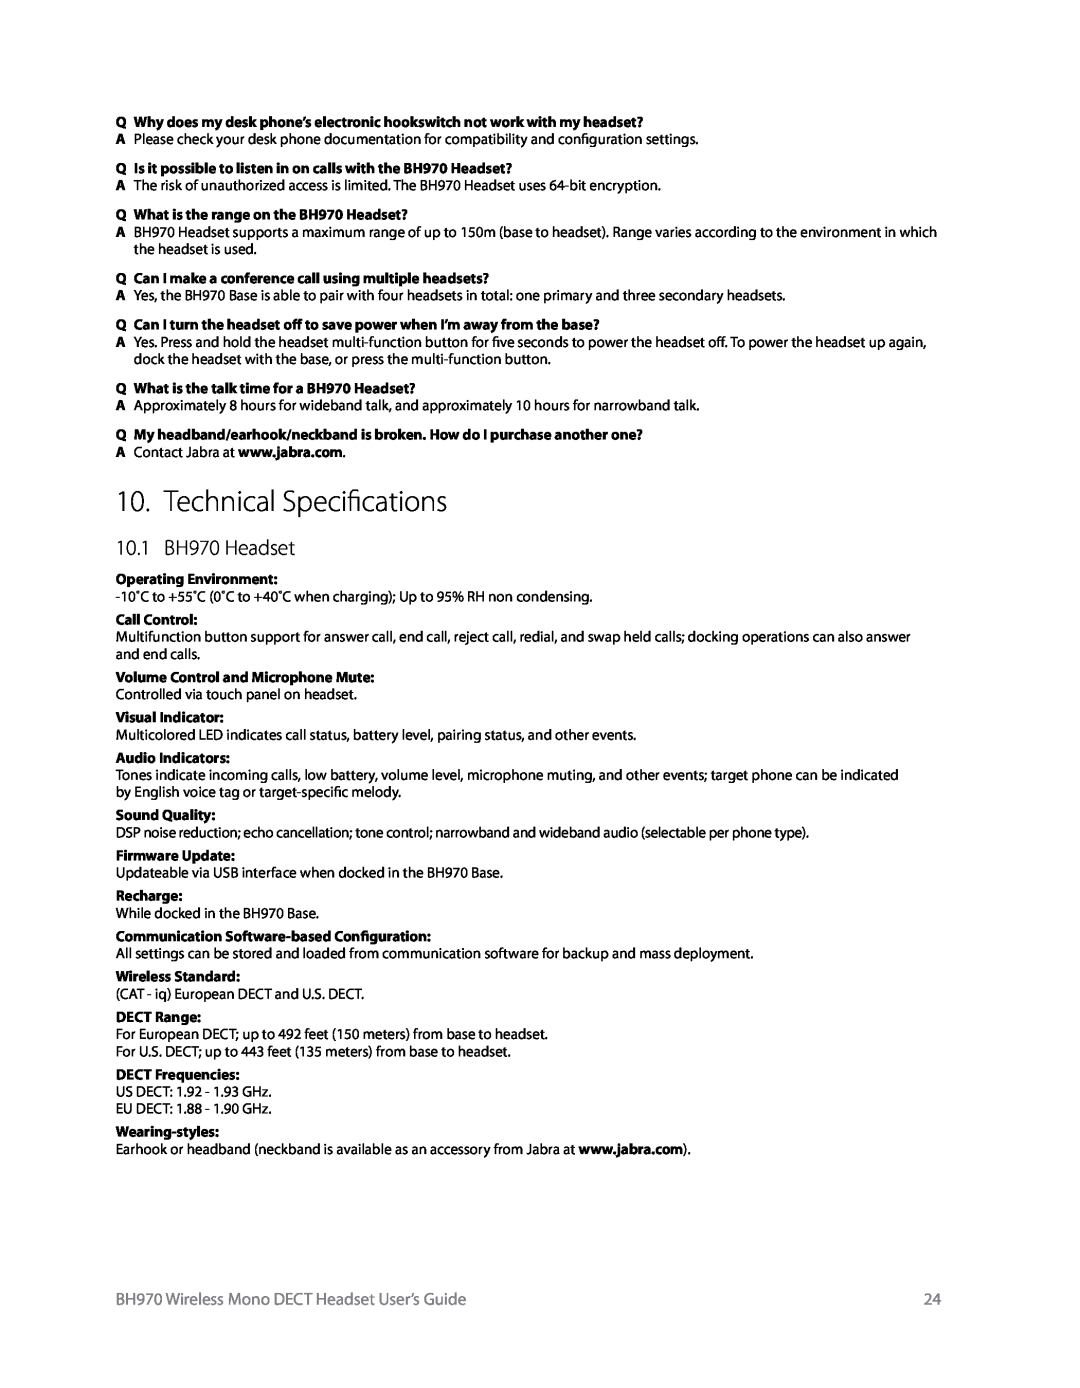 Logitech manual Technical Specifications, 10.1 BH970 Headset, BH970 Wireless Mono DECT Headset User’s Guide 